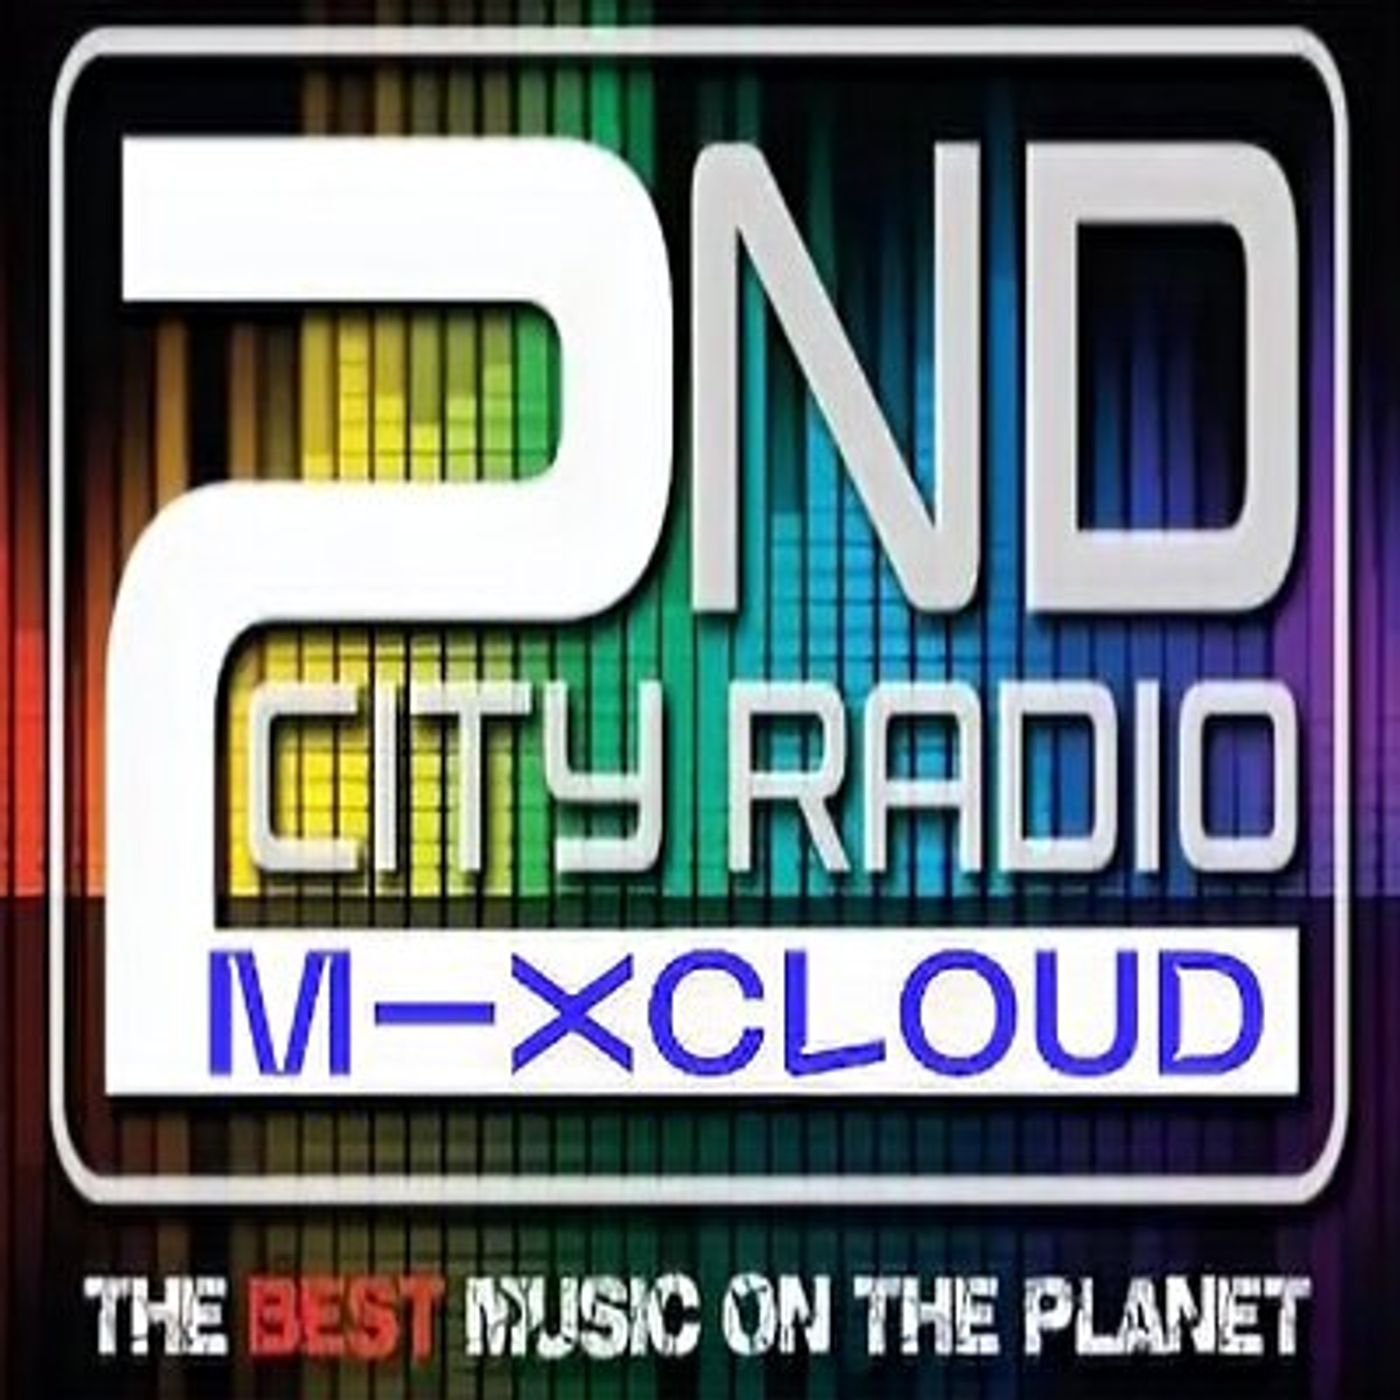 Sunday the 2nd of Jan 2022 on 2ndcity Radio with Classic Chat